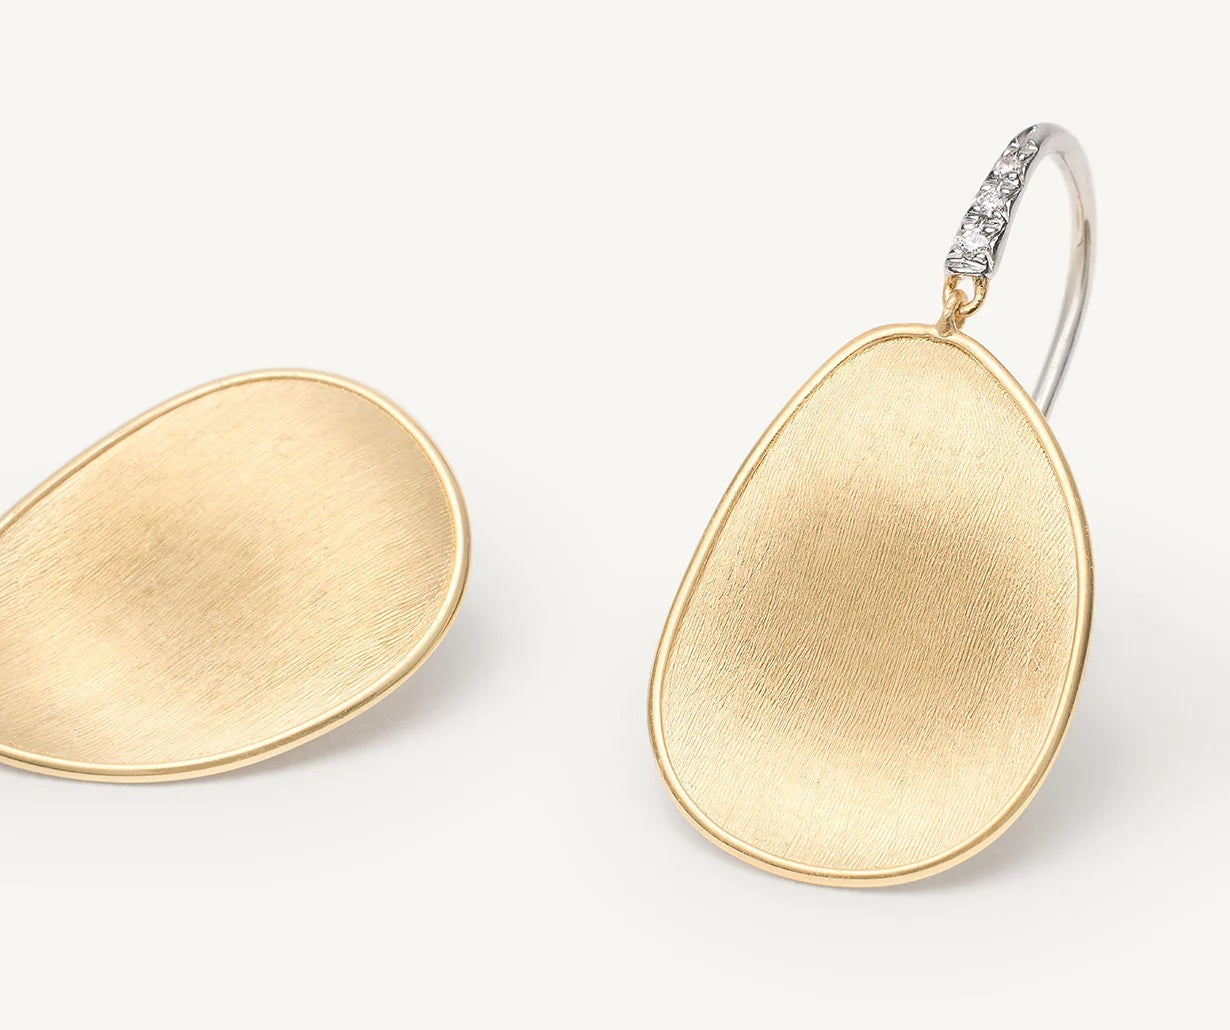 18K YELLOW GOLD MEDIUM PETAL DROP EARRINGS WITH DIAMONDS FROM THE LUNARIA COLLECTION